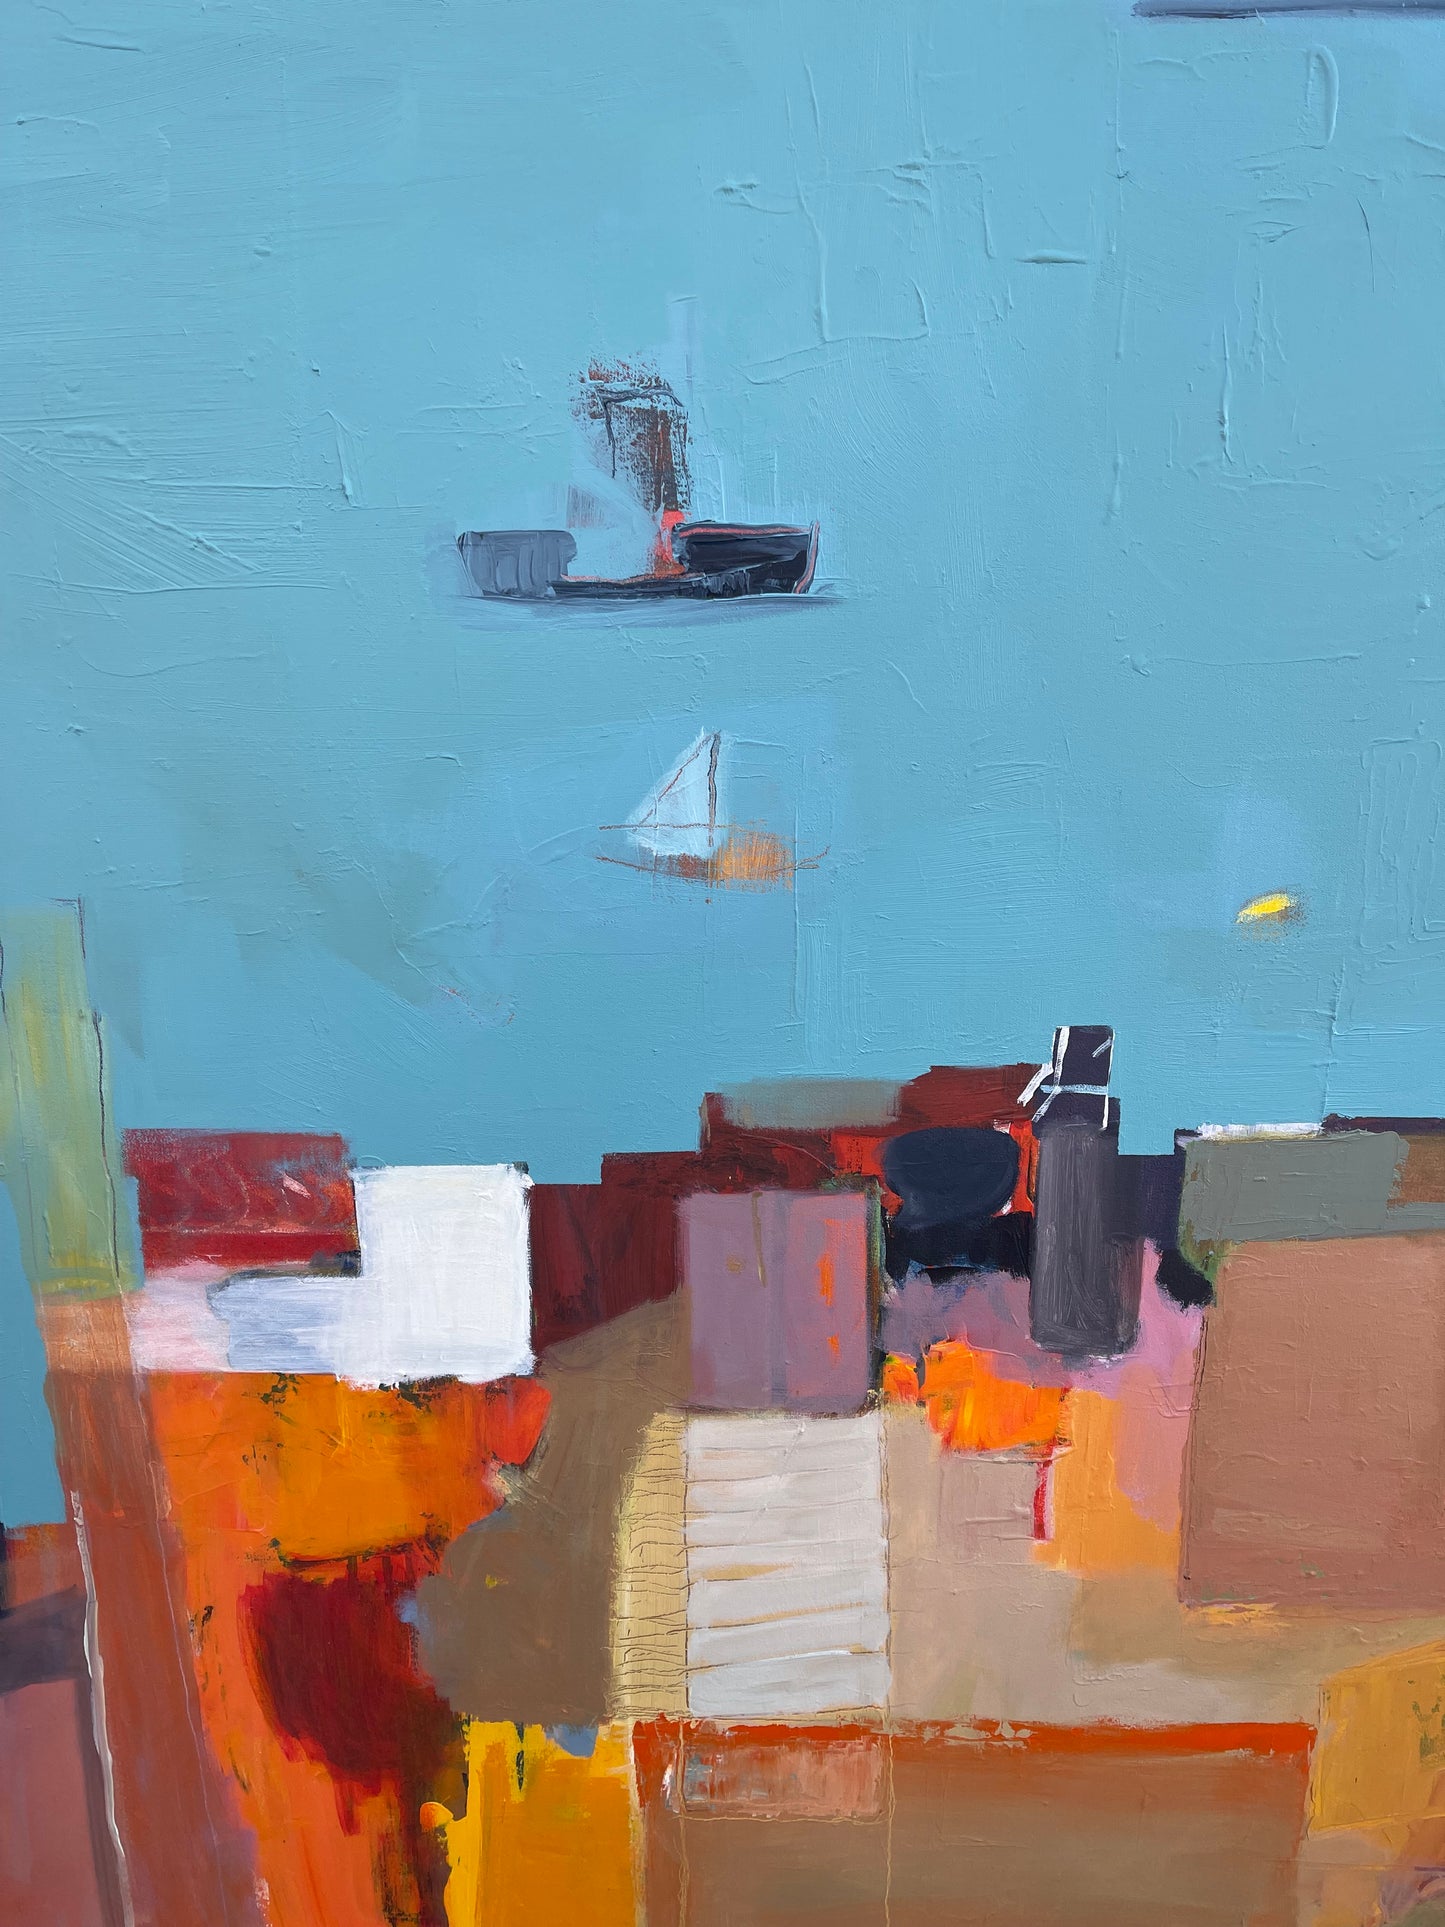 Mary Visser b. 1971 Large Scale Abstract Oil on Canvas Harbour Scene